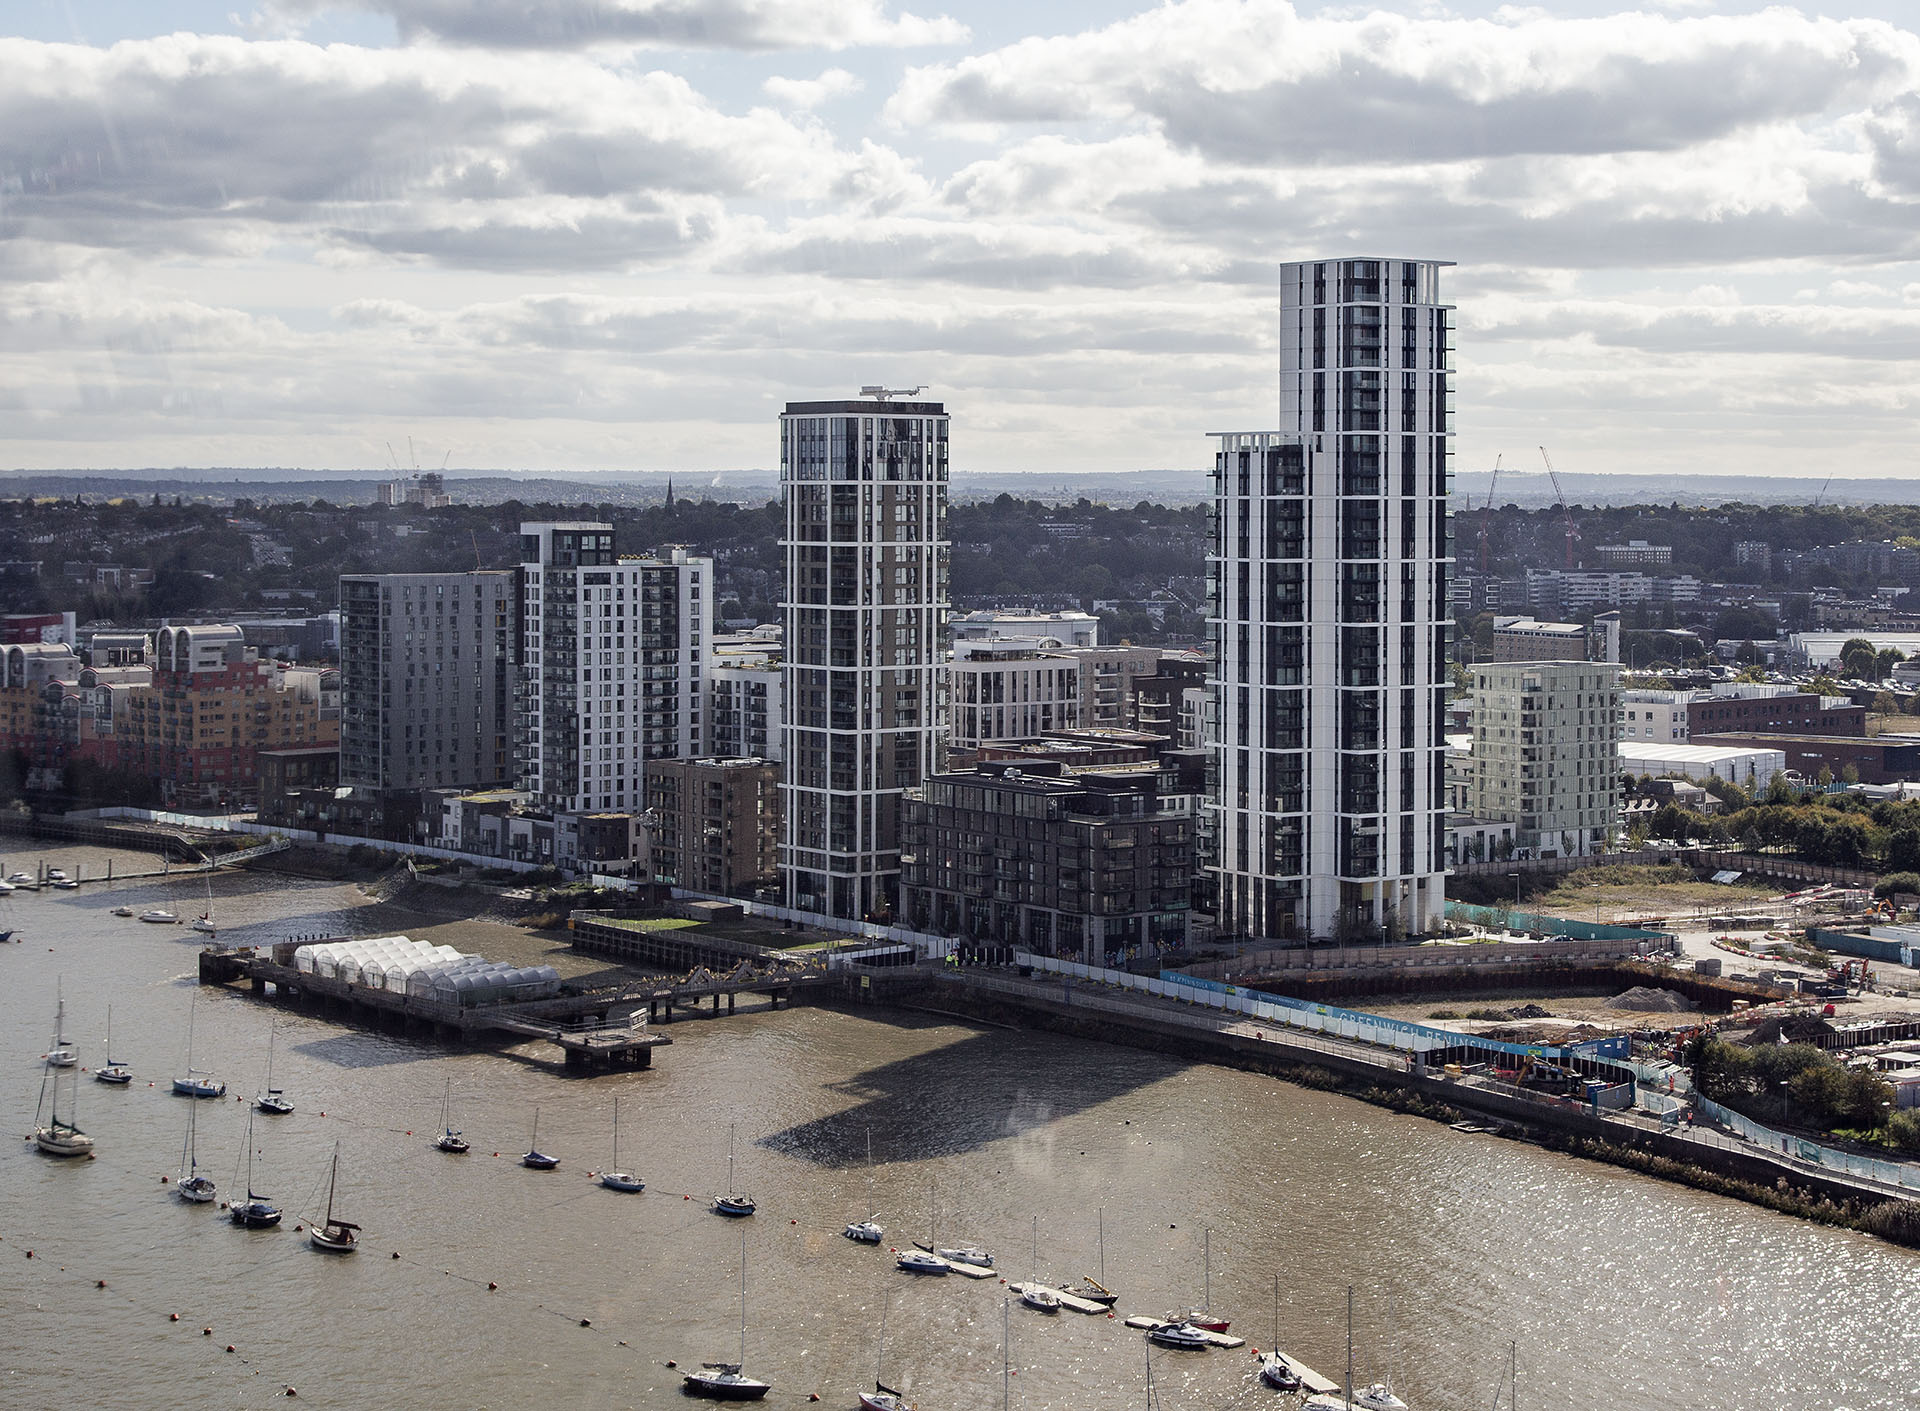 The Waterman and Lighterman buildings as seen from cable car crossing the river Thames in foreground